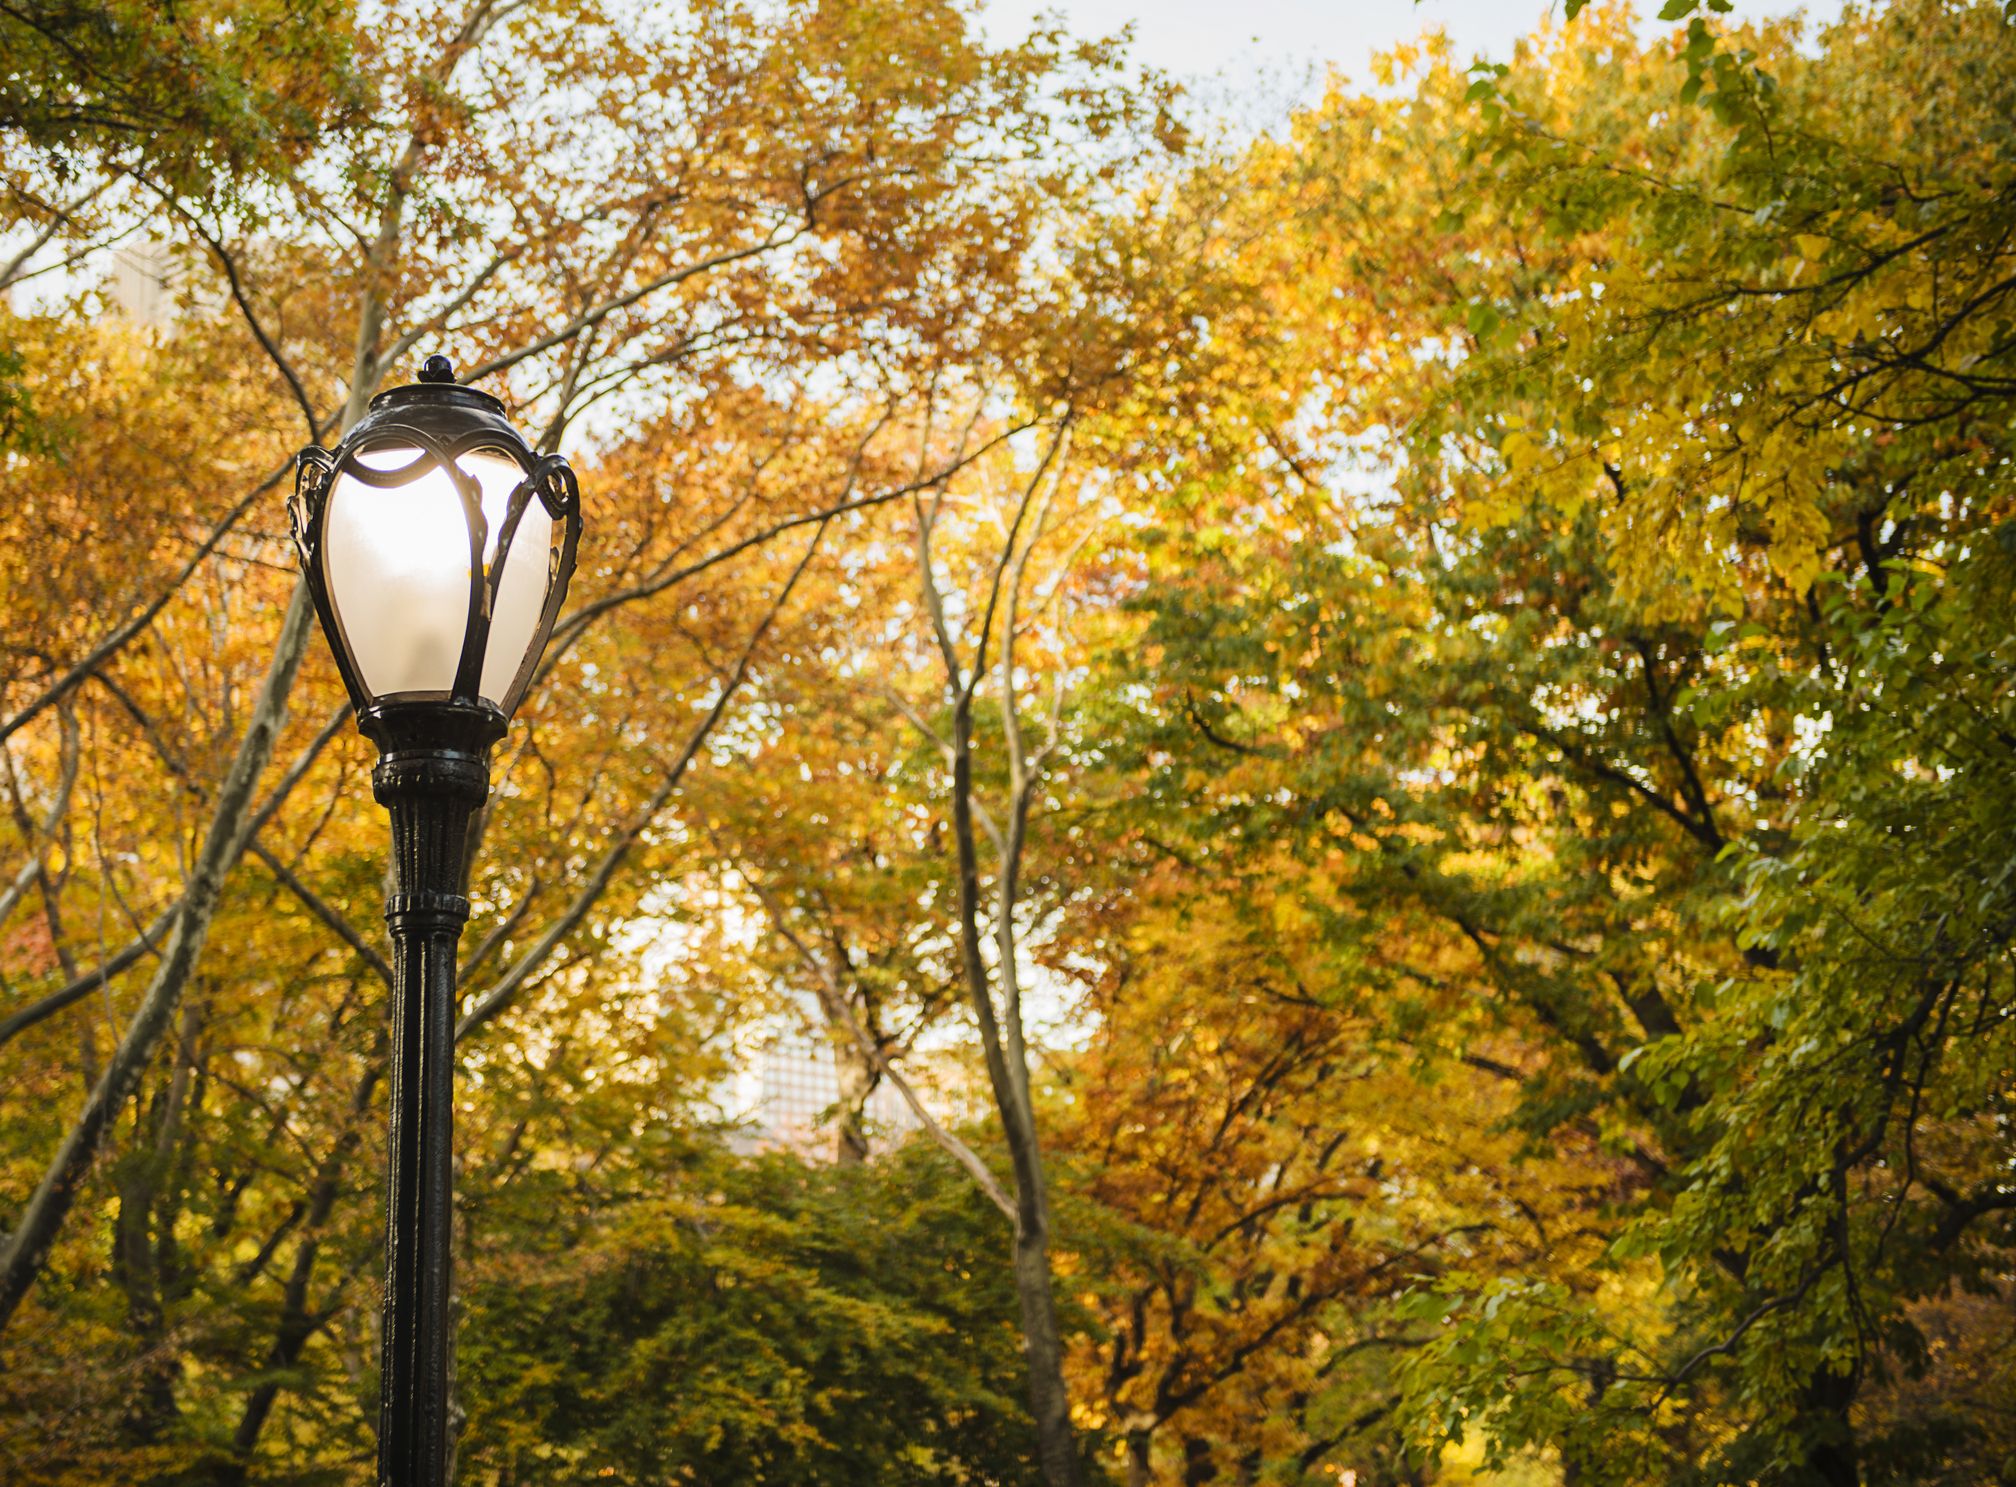 How To Read The Secret Code On, Code Of Central Park Lamp Posts